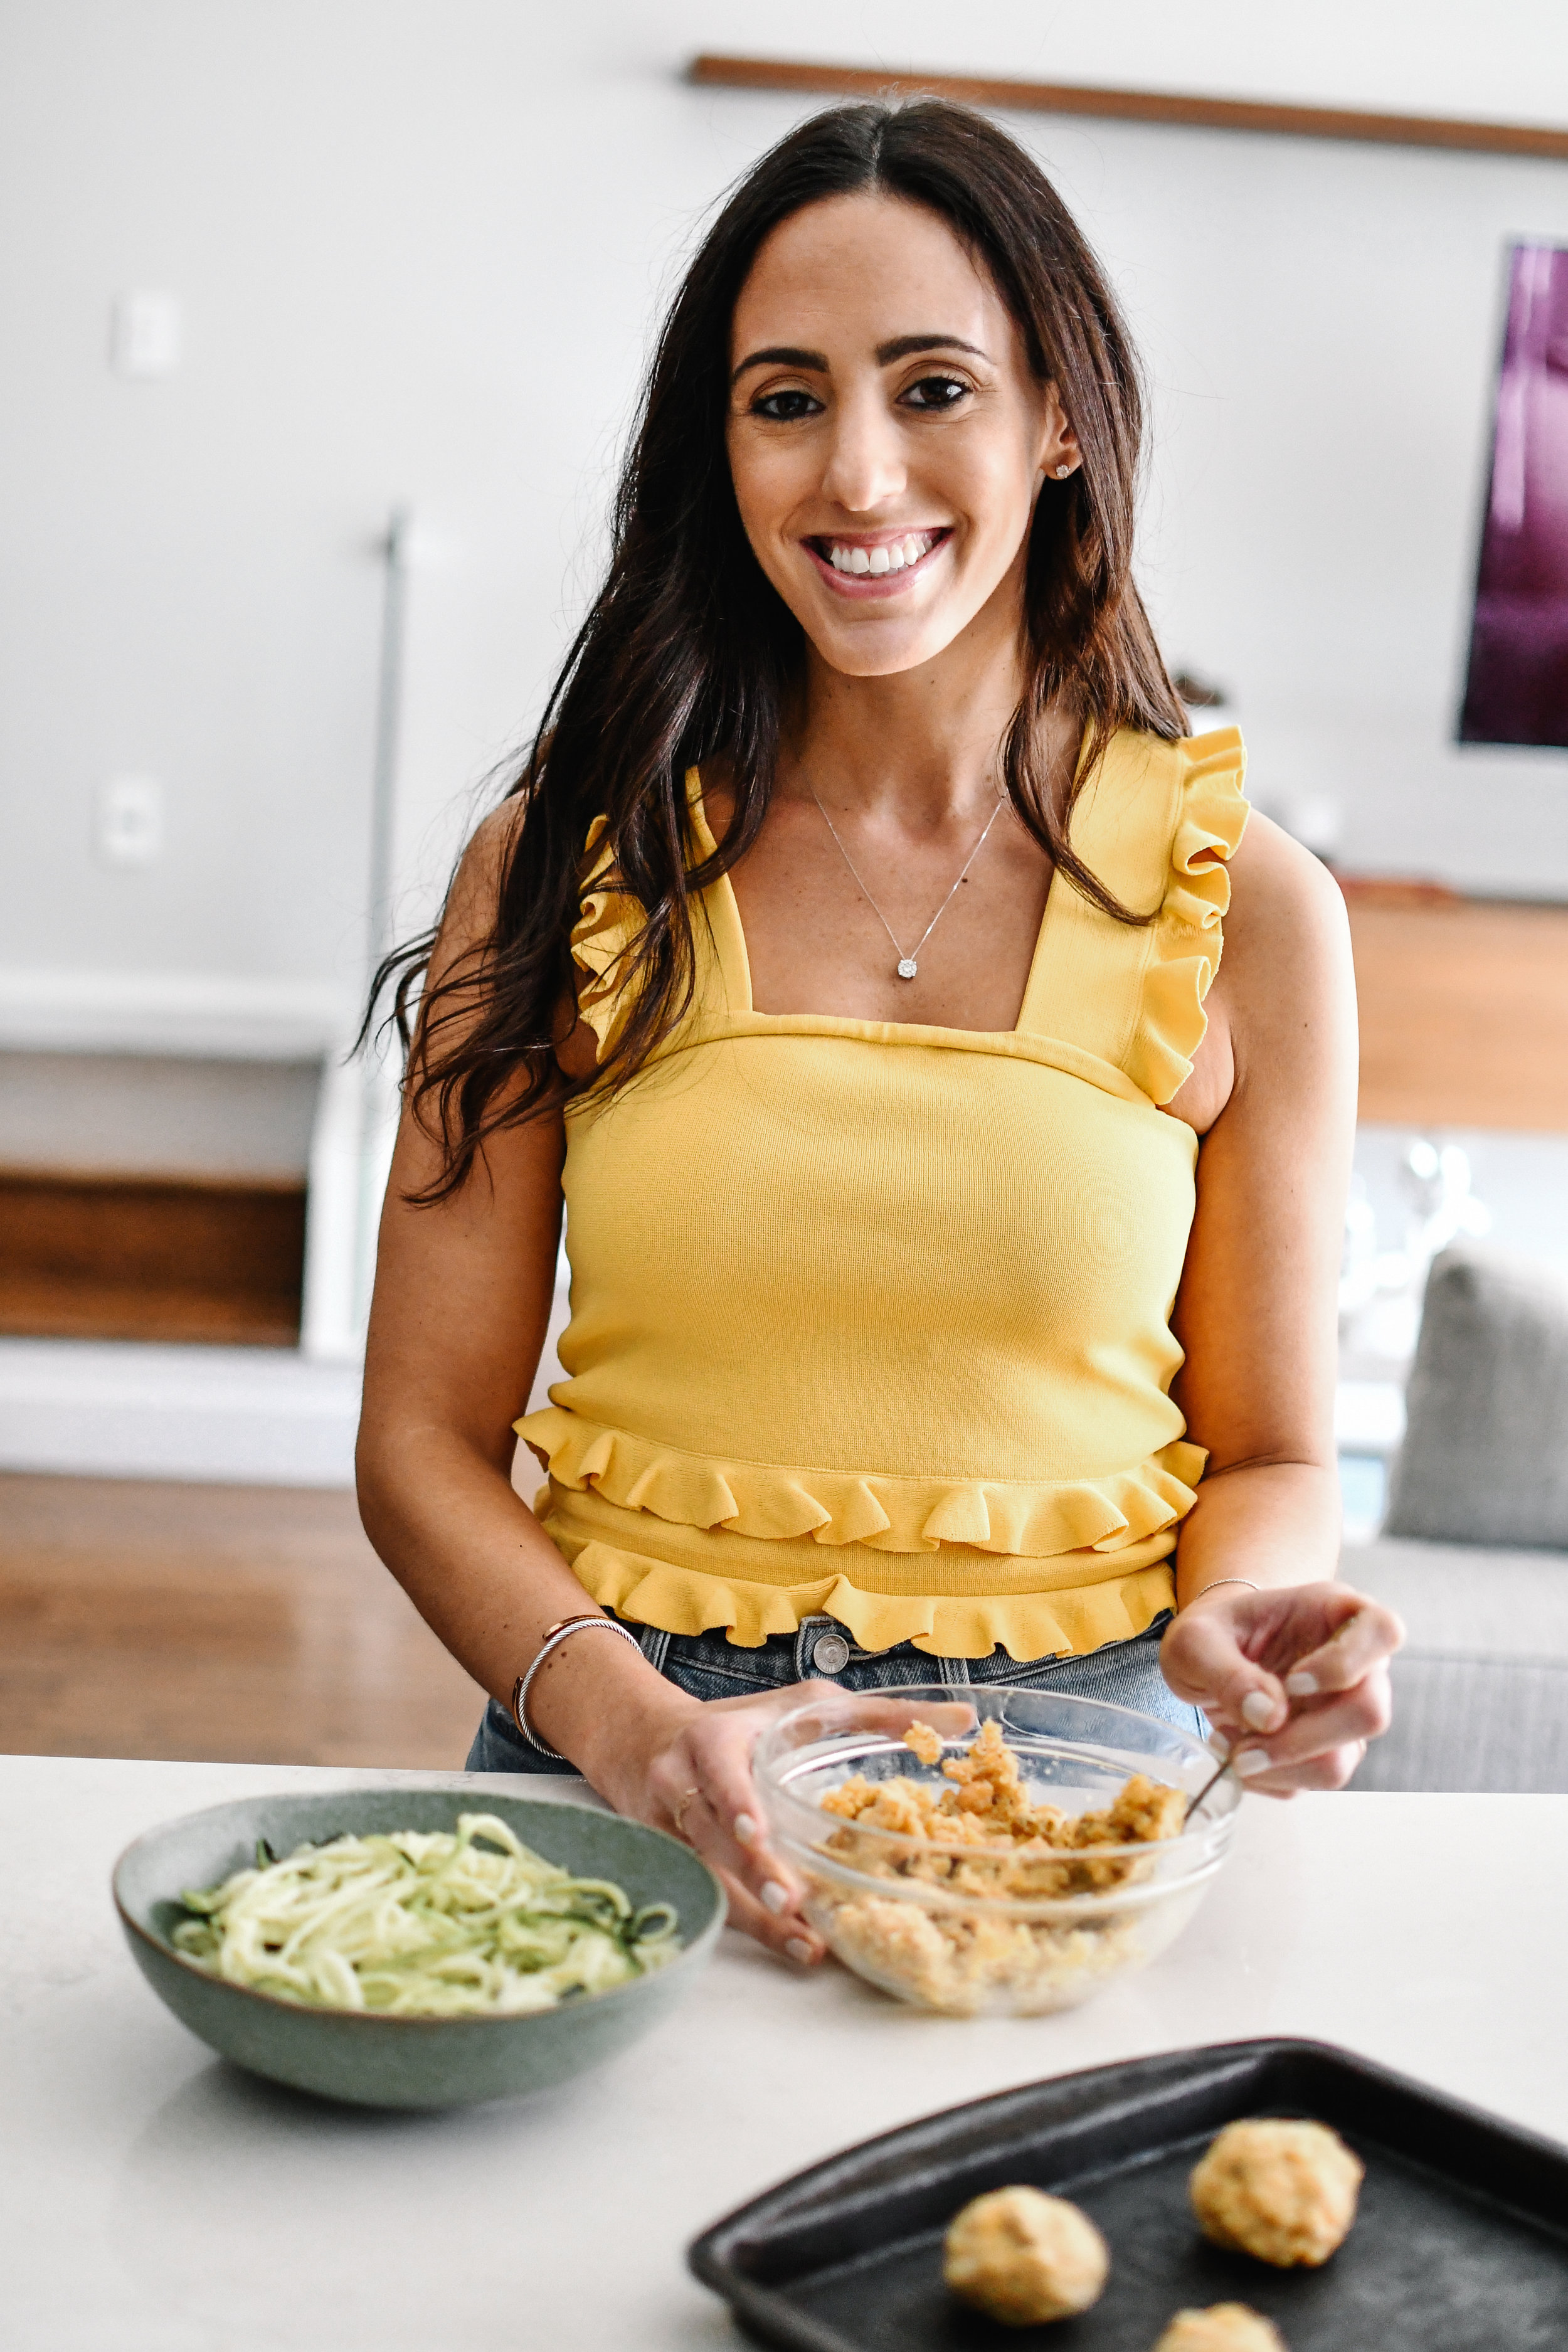 About — Sammi Brondo | NYC based Registered Dietitian Nutritionist